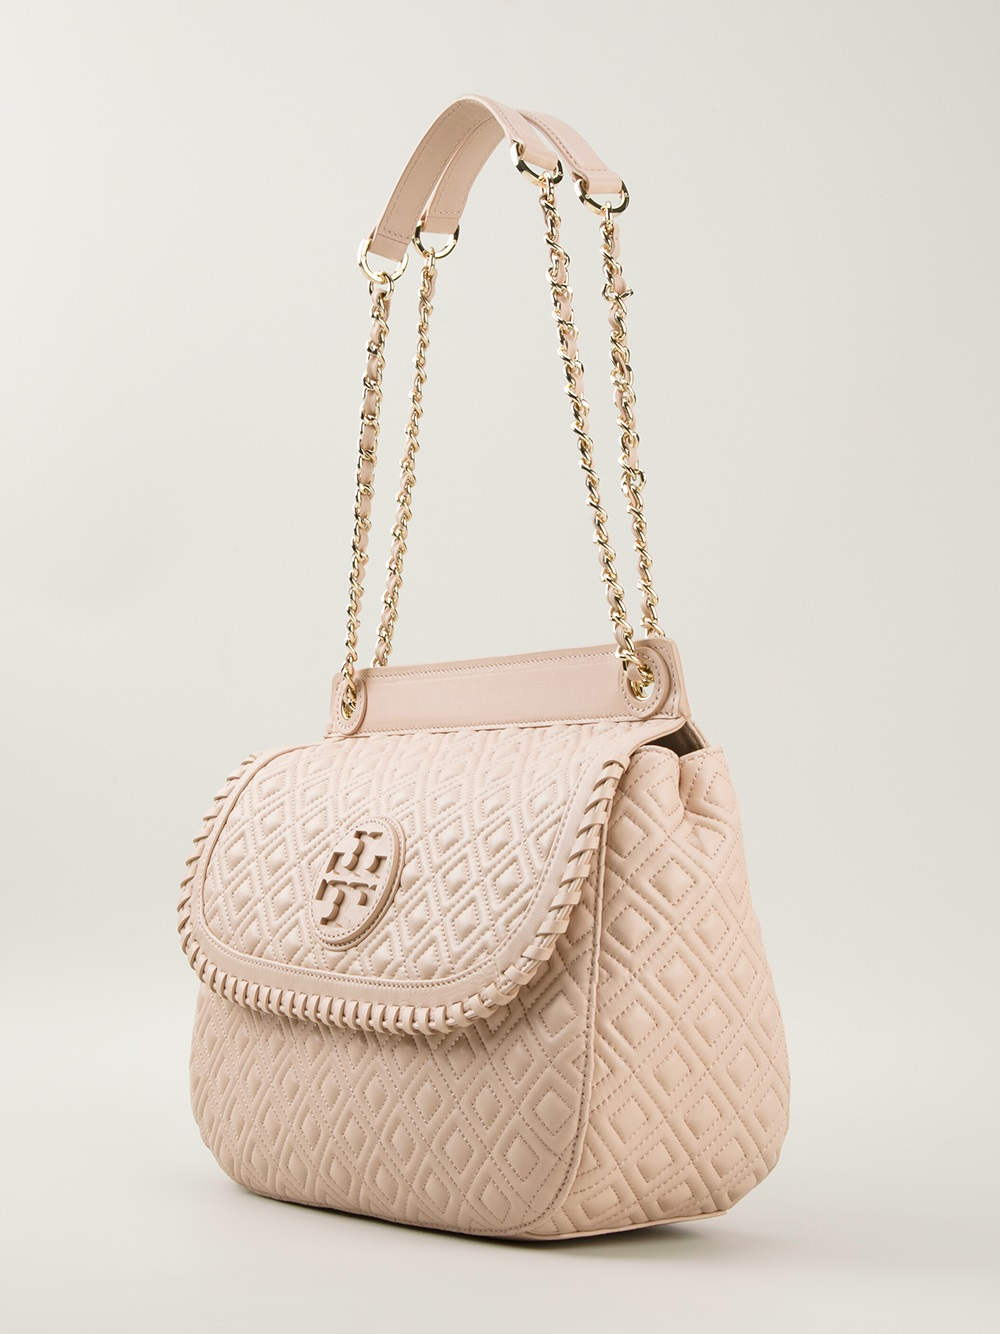 Lyst - Tory Burch Quilted Shoulder Bag in Pink